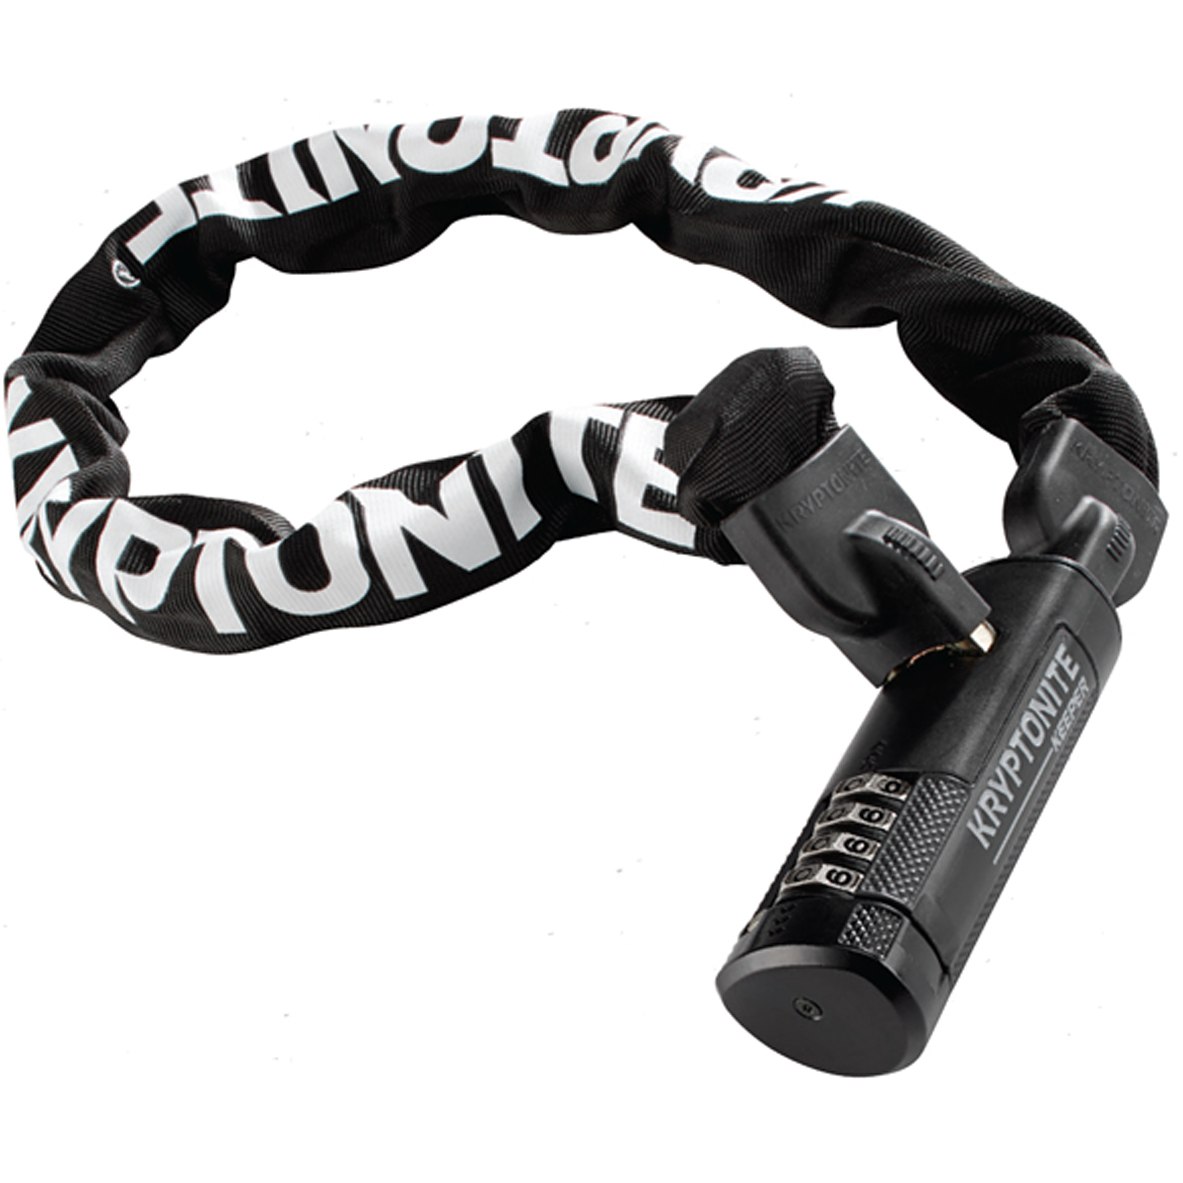 Picture of Kryptonite Keeper Combo Integrated Chain 790 Chain Lock